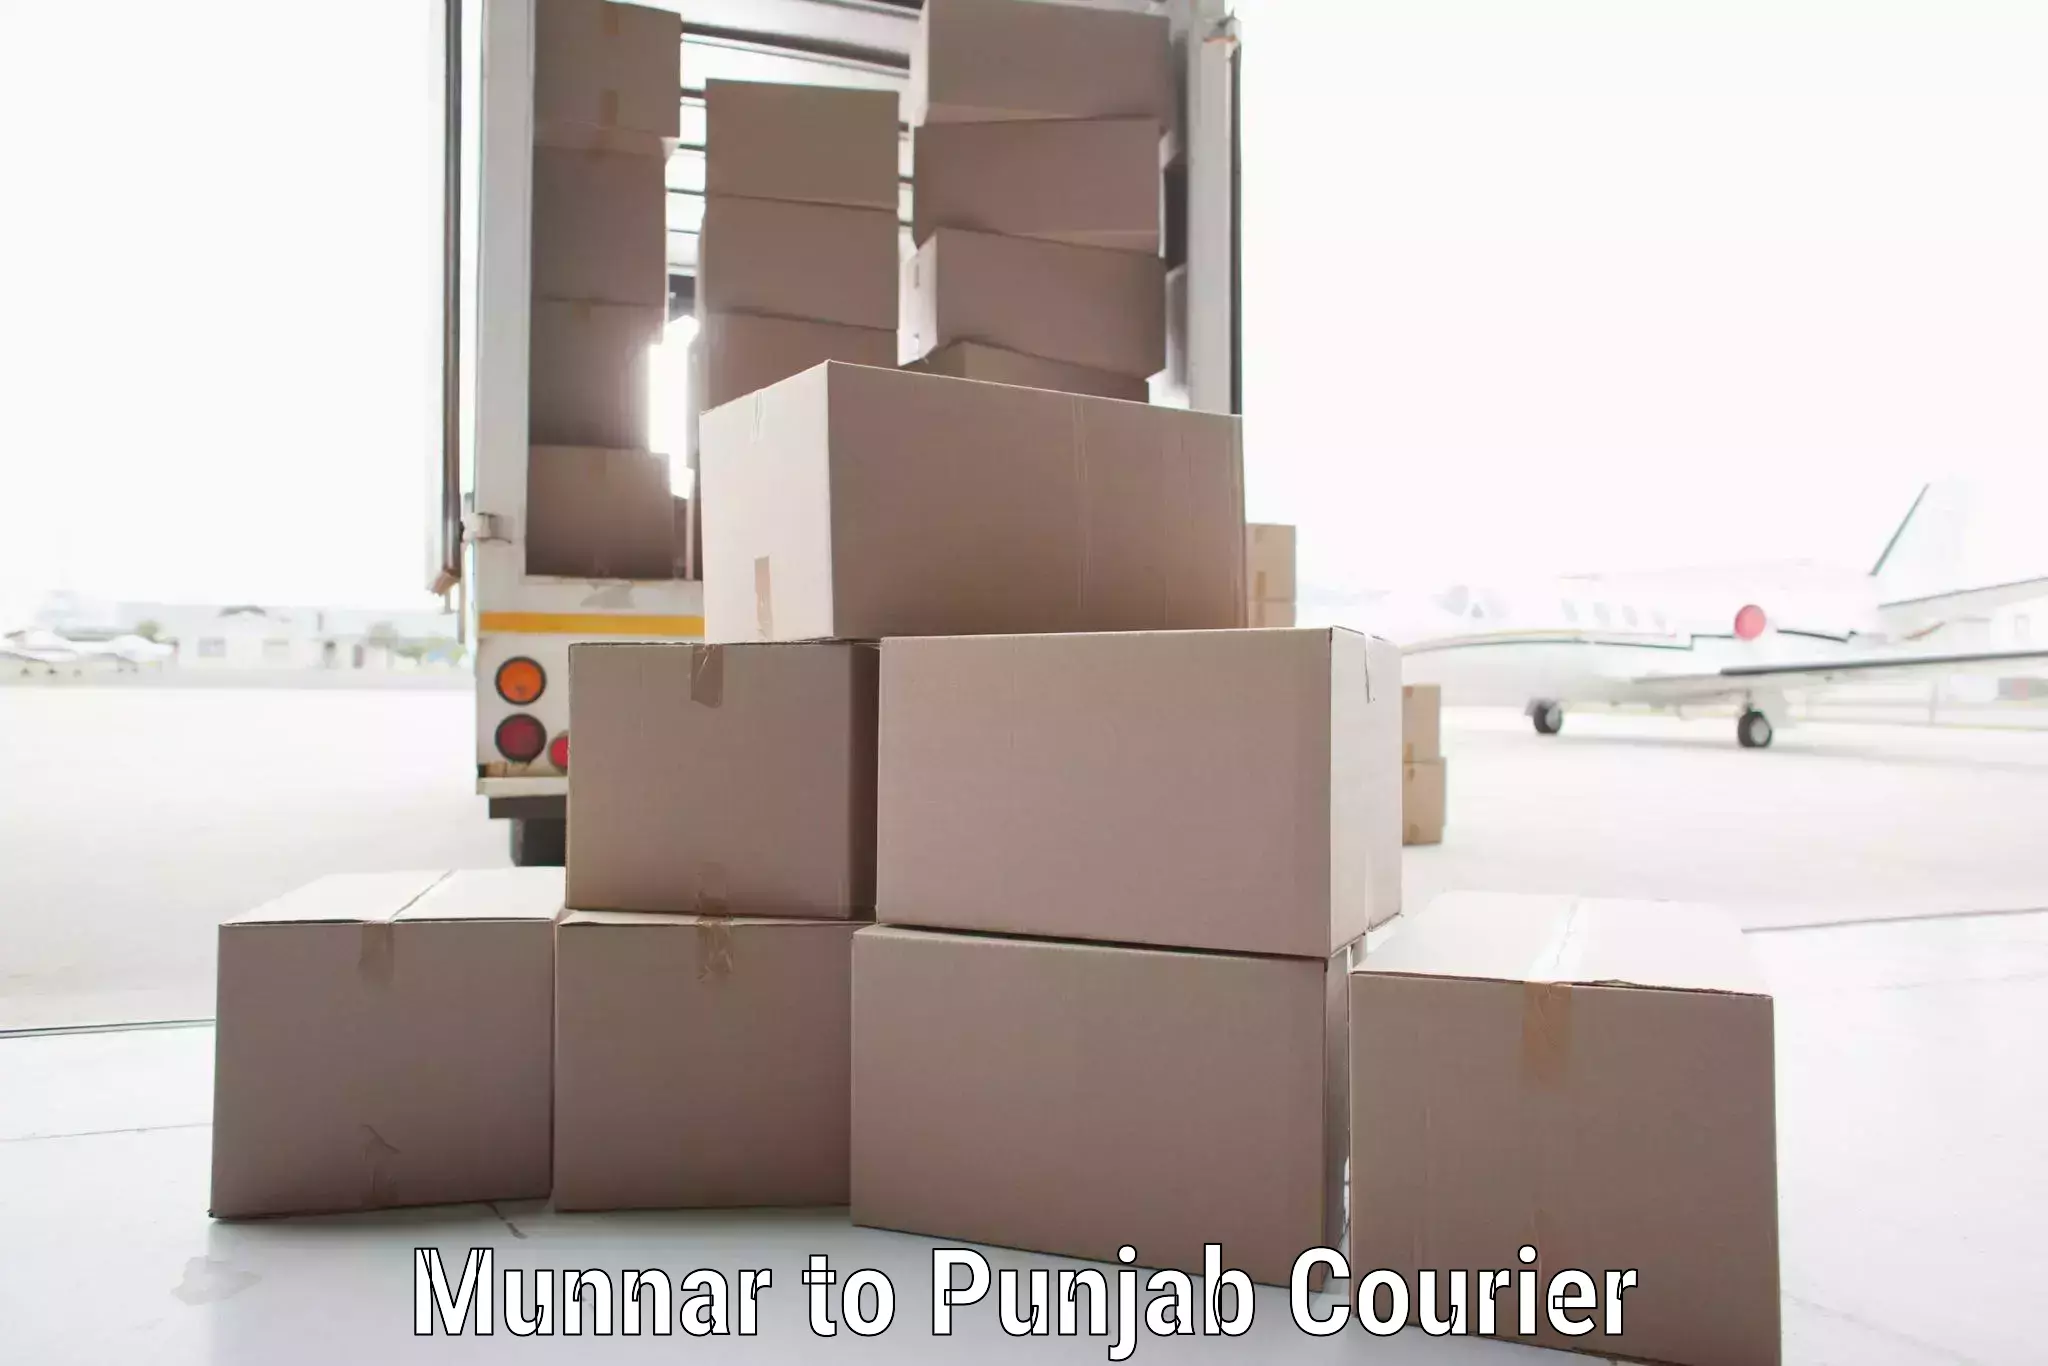 Full-service courier options Munnar to Talwara